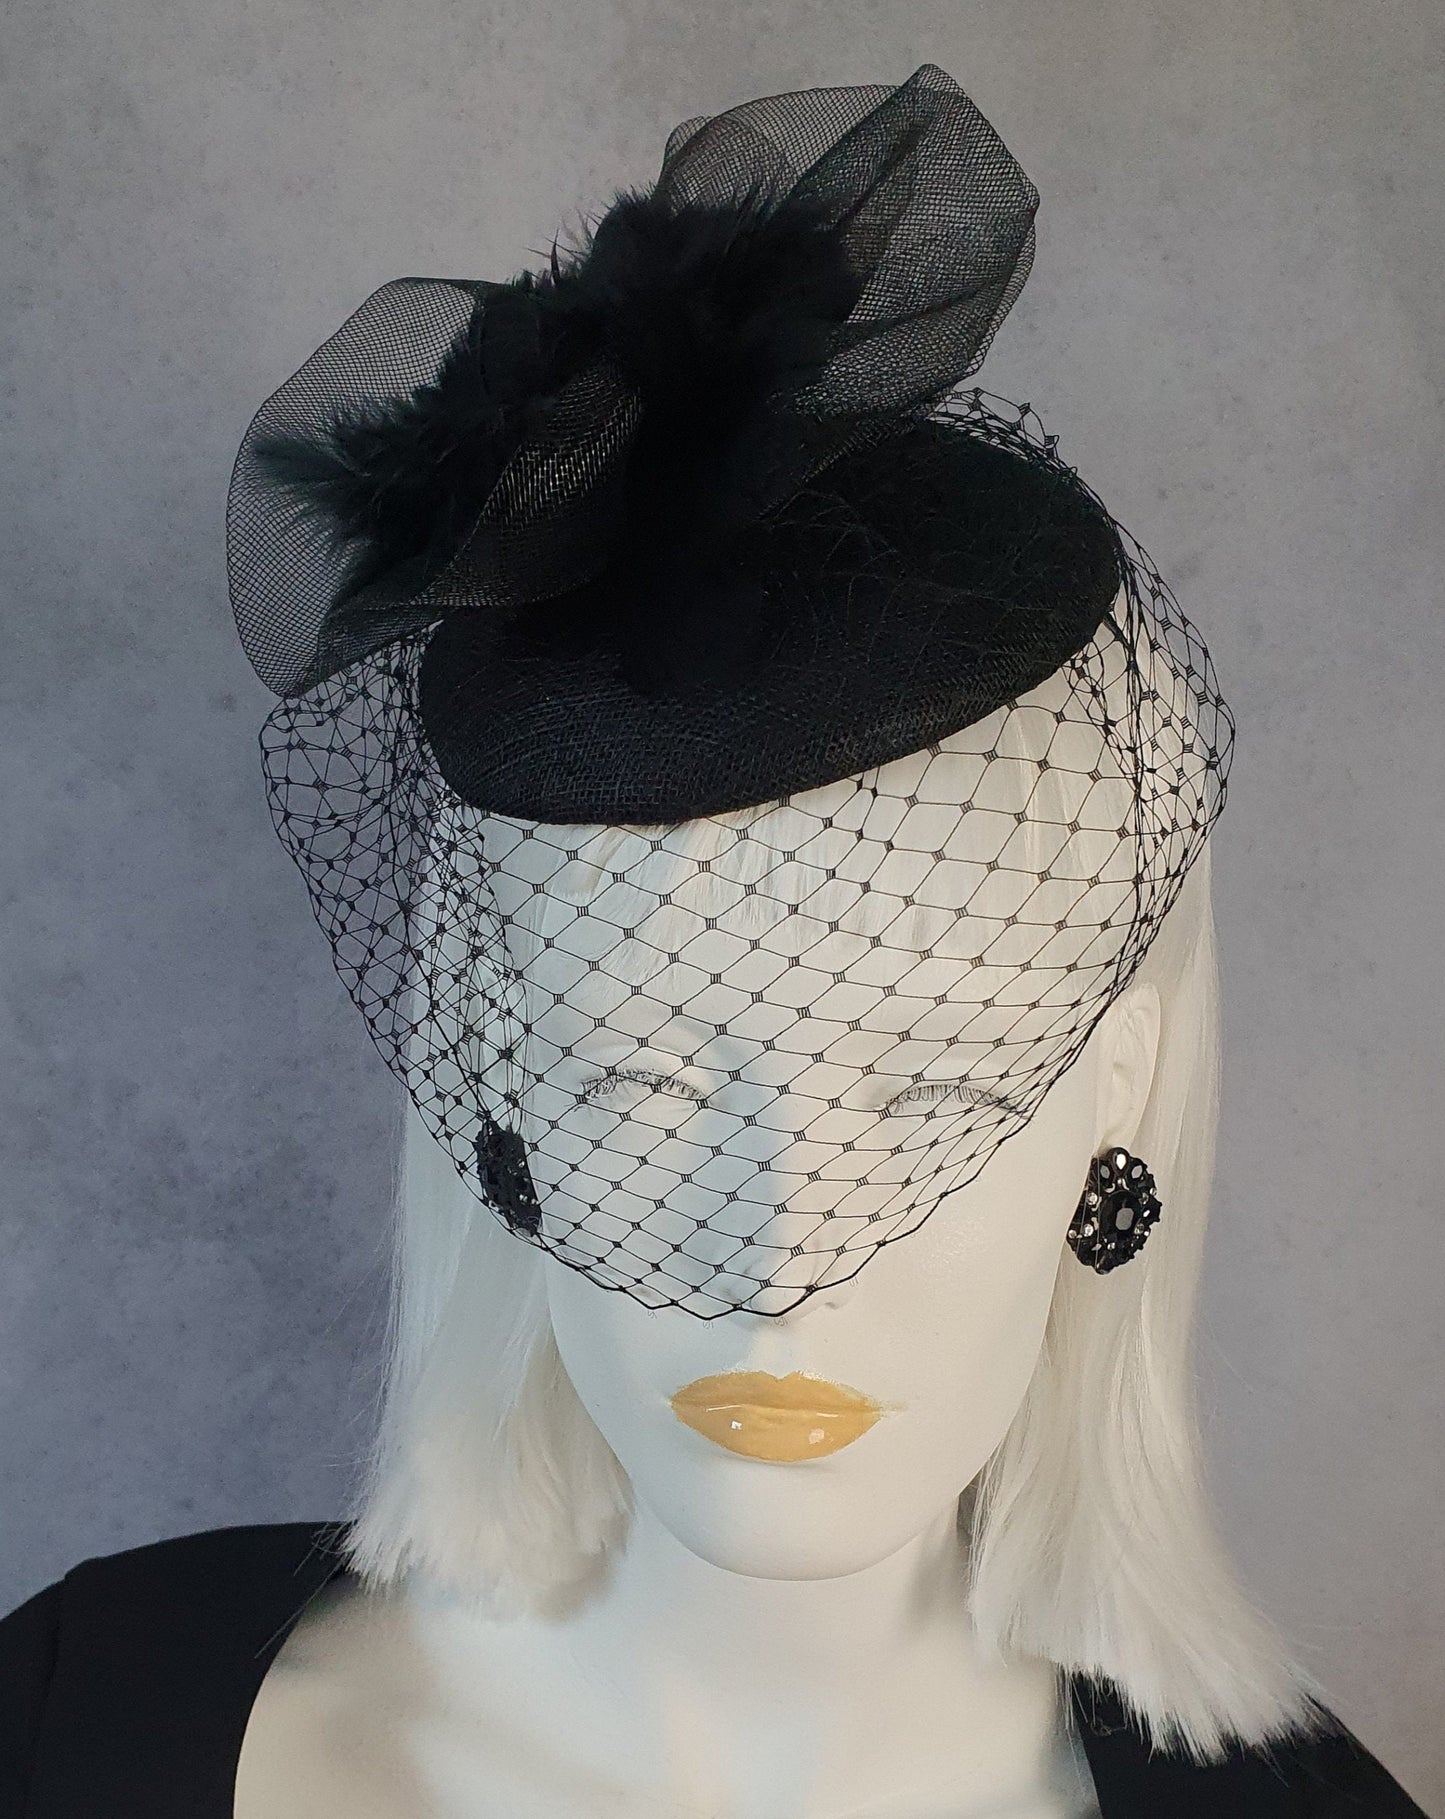 Black fascinator handmade from sinamay, with crinoline rooster feathers and metal diadem, headdress - Perfect for festive occasions